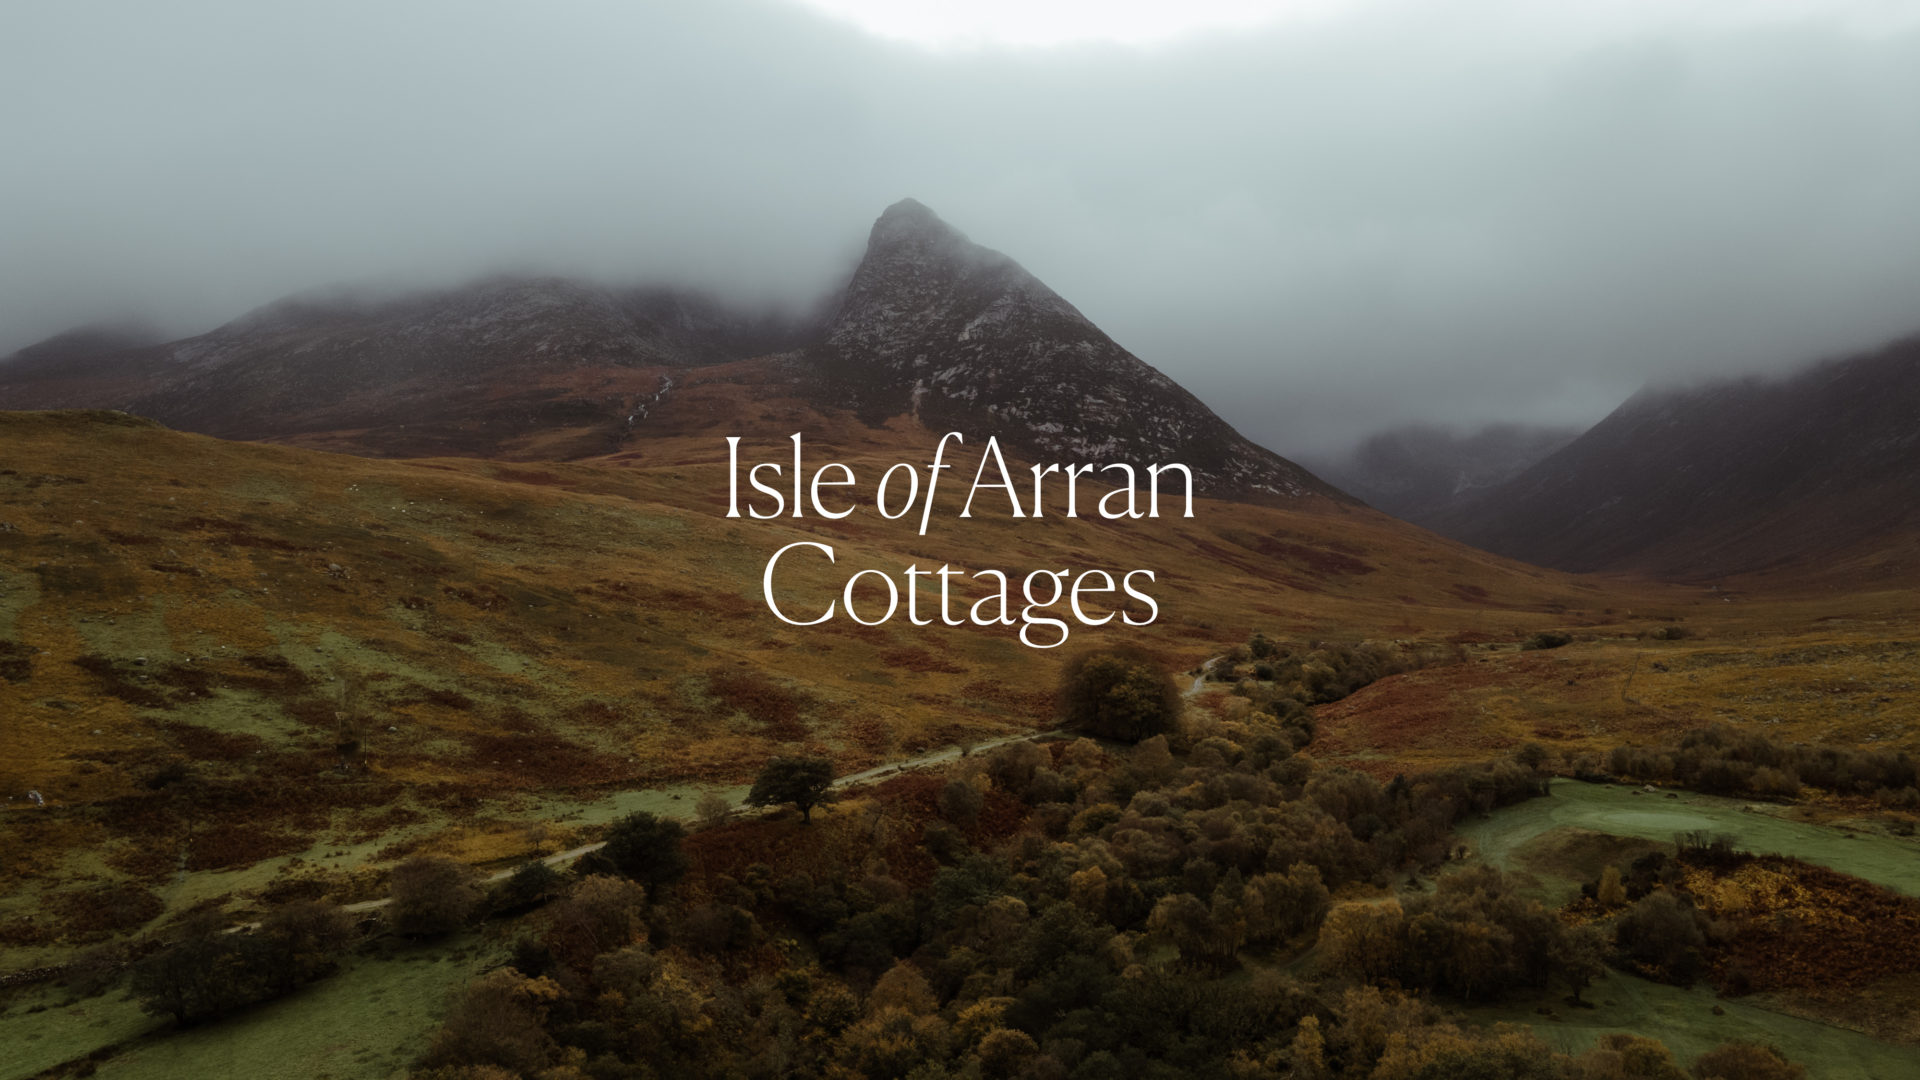 Isle of Arran Cottages